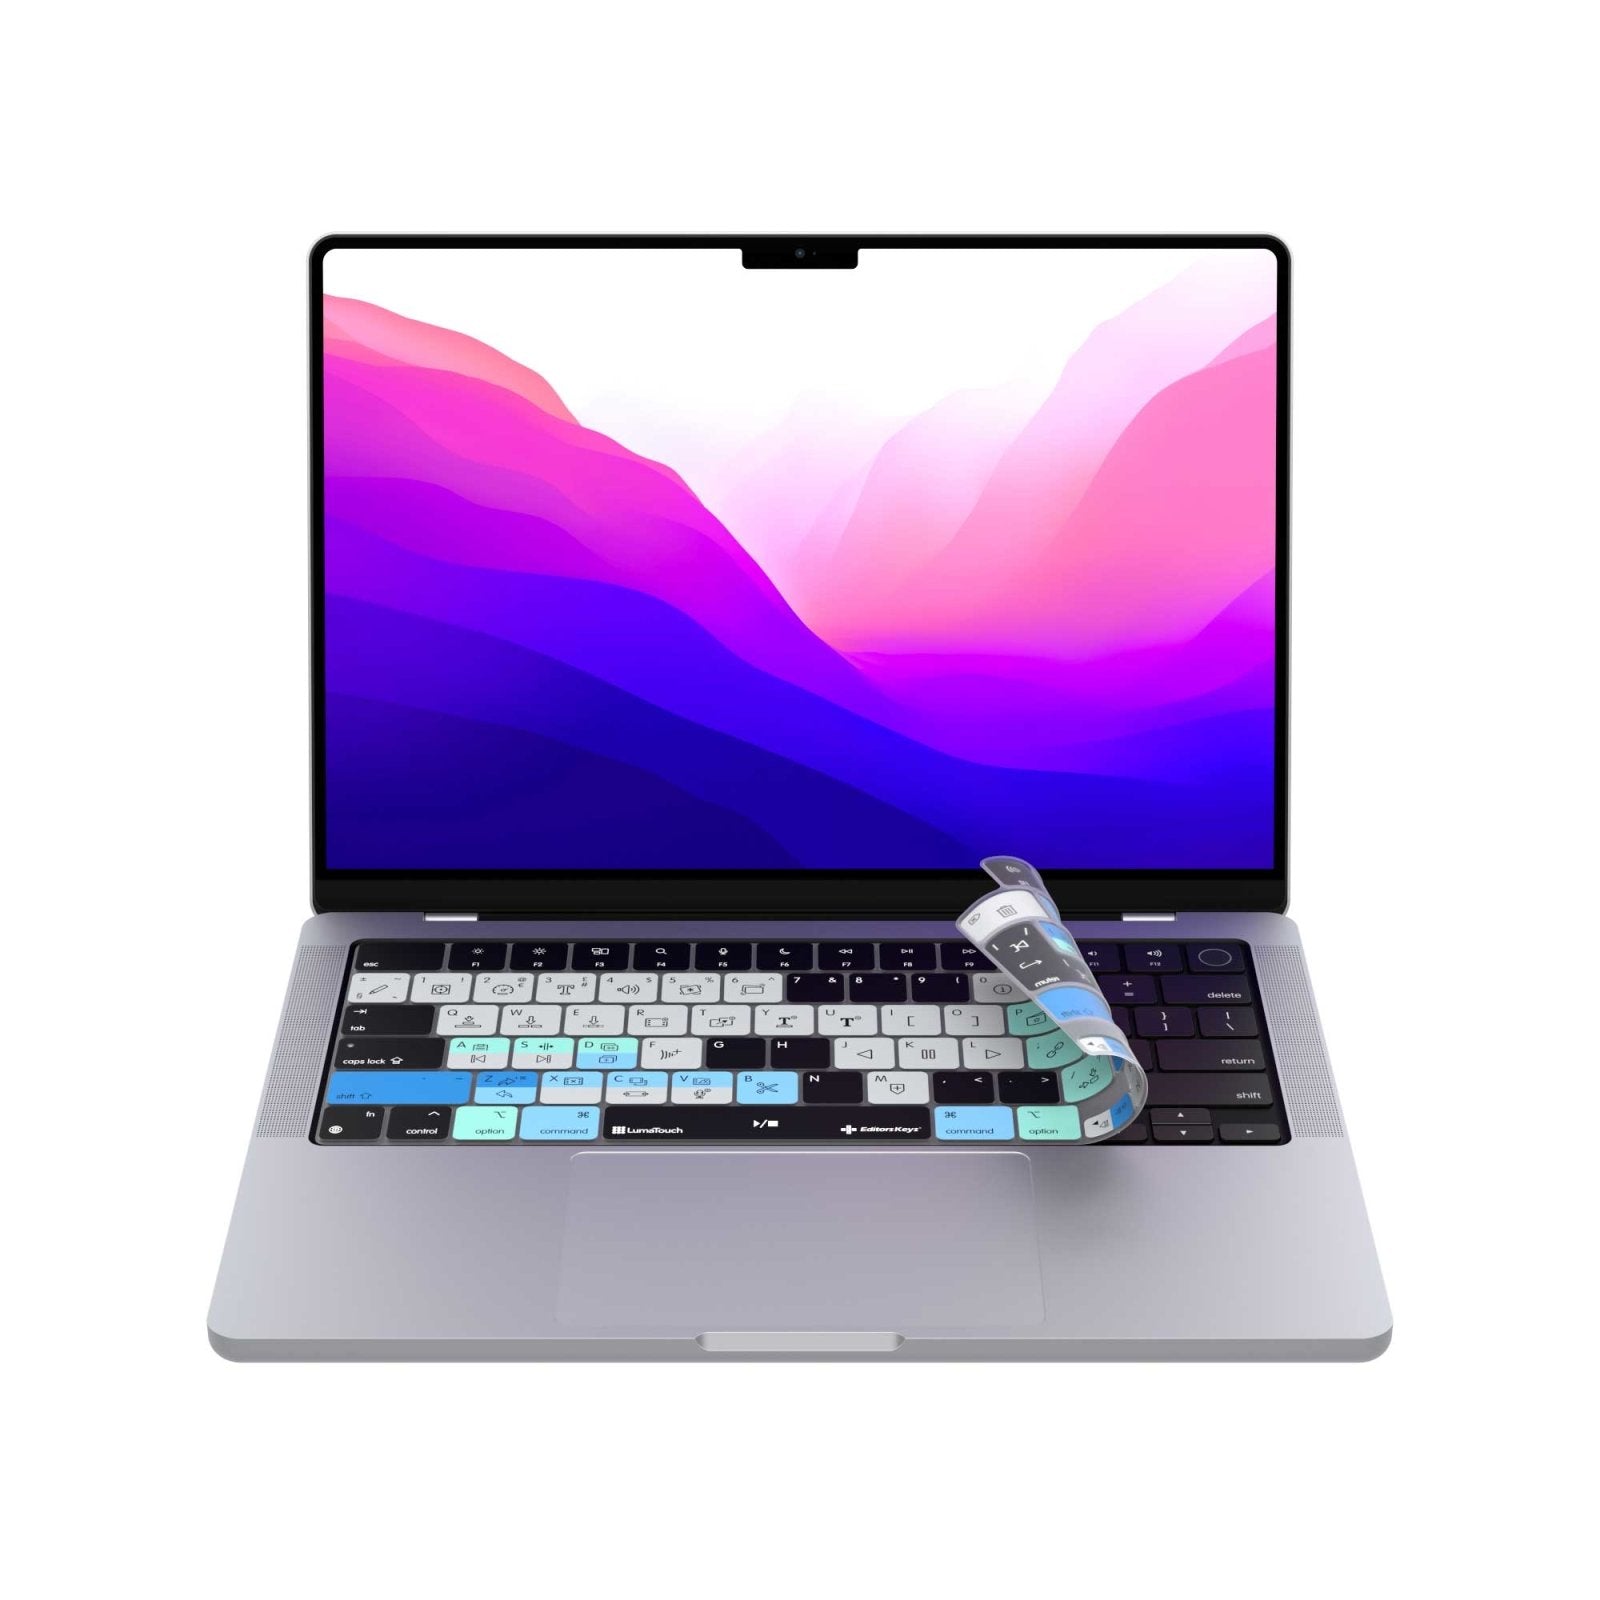 Lumafusion Keyboard Cover for 14" and 16" MacBook Pro